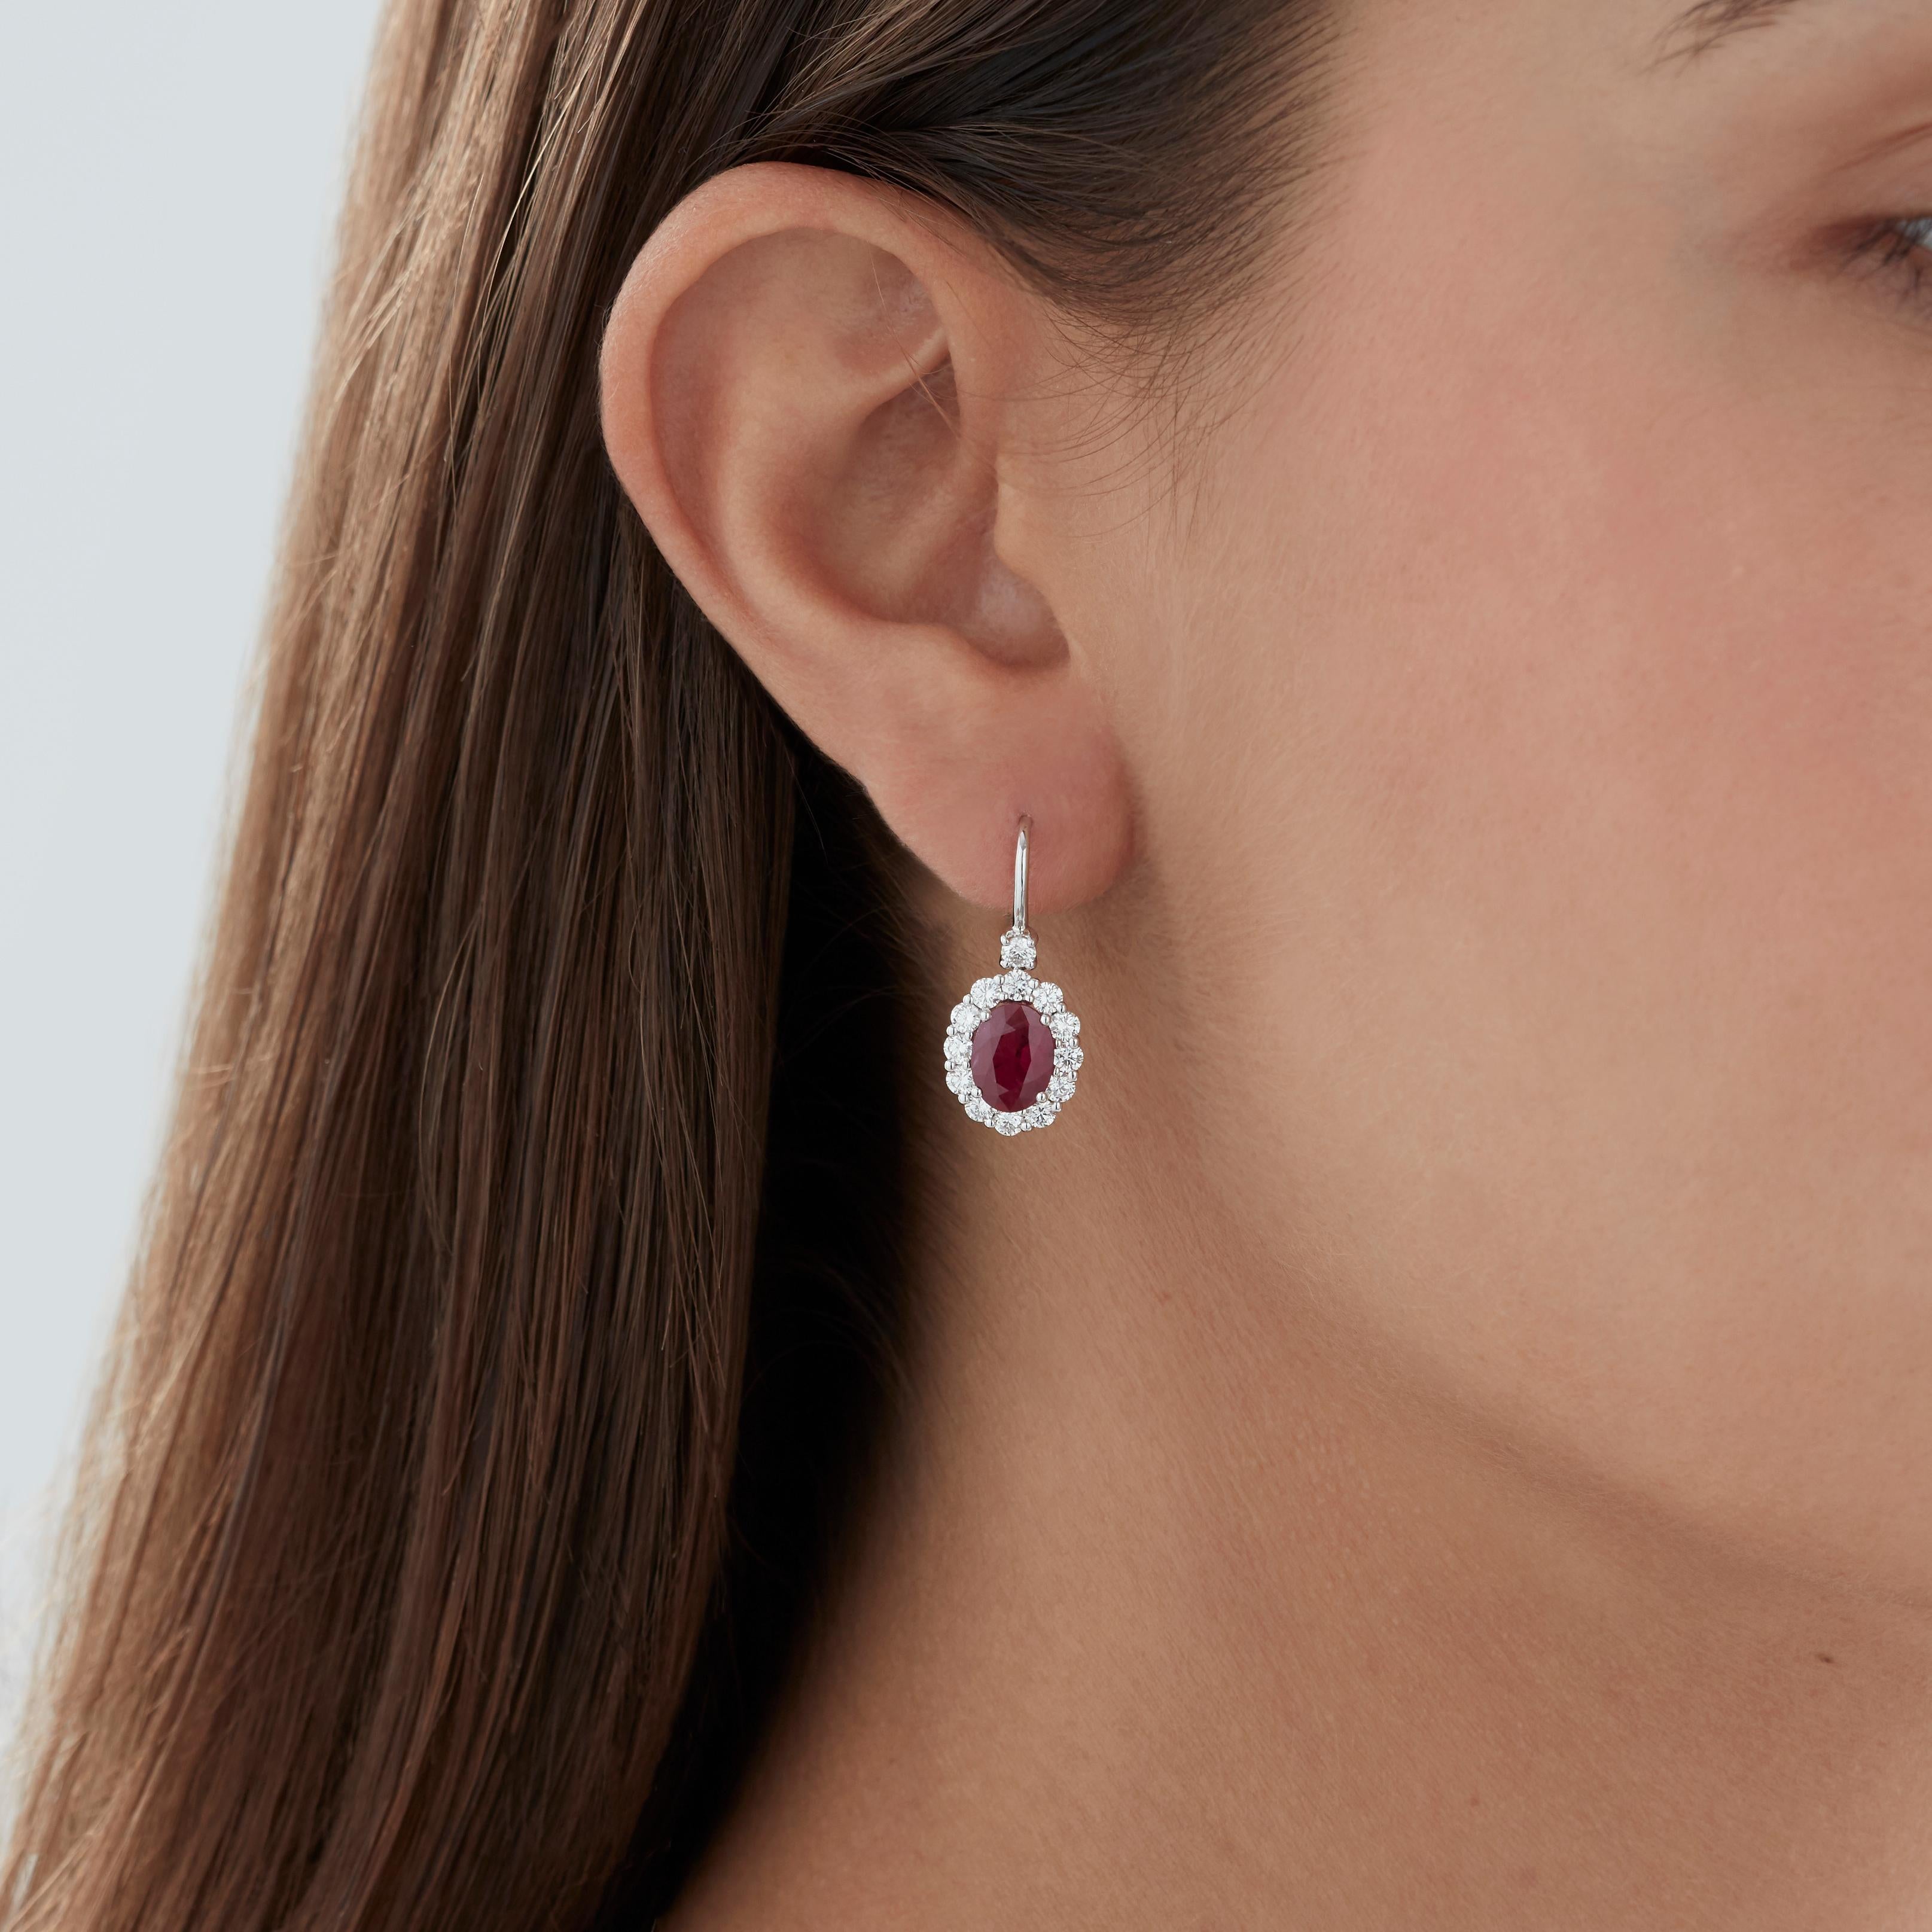 A House of Garrard pair of platinum drop earrings from the 'Garrard 1735' collection, set with central oval rubies and round white diamonds.

26 round white diamonds weighing: 1.12cts
2 oval rubies approx 8x6mm

The House of Garrard is the longest